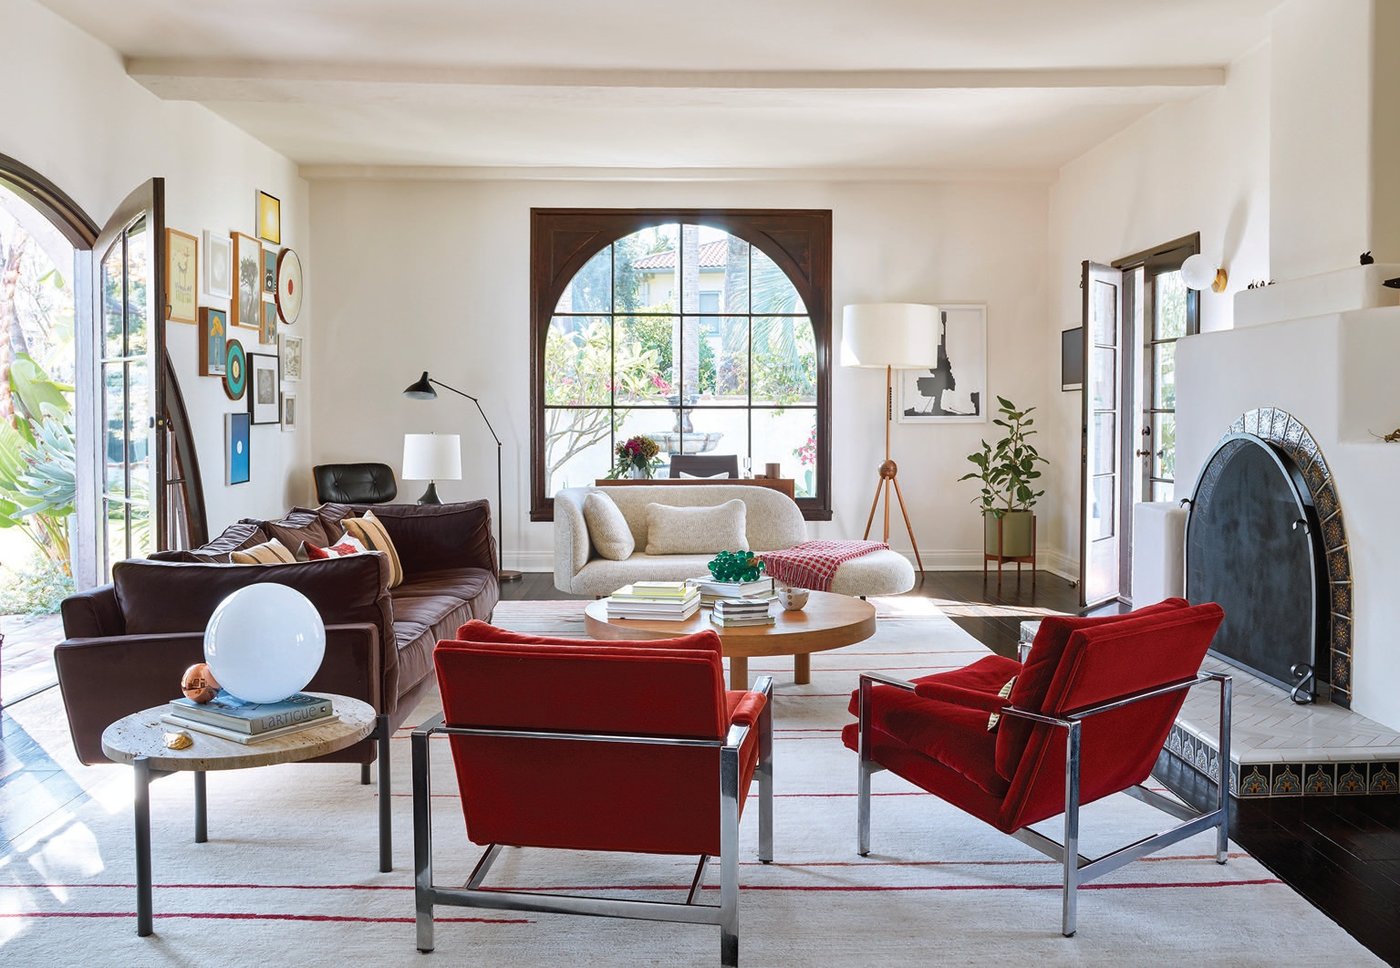 The living room—which contains a De Padova sofa, vintage Milo Baughman armchairs and a settee sourced from The Future Perfect—exudes an air of laid-back sophistication Photographed by Trevor Tondro